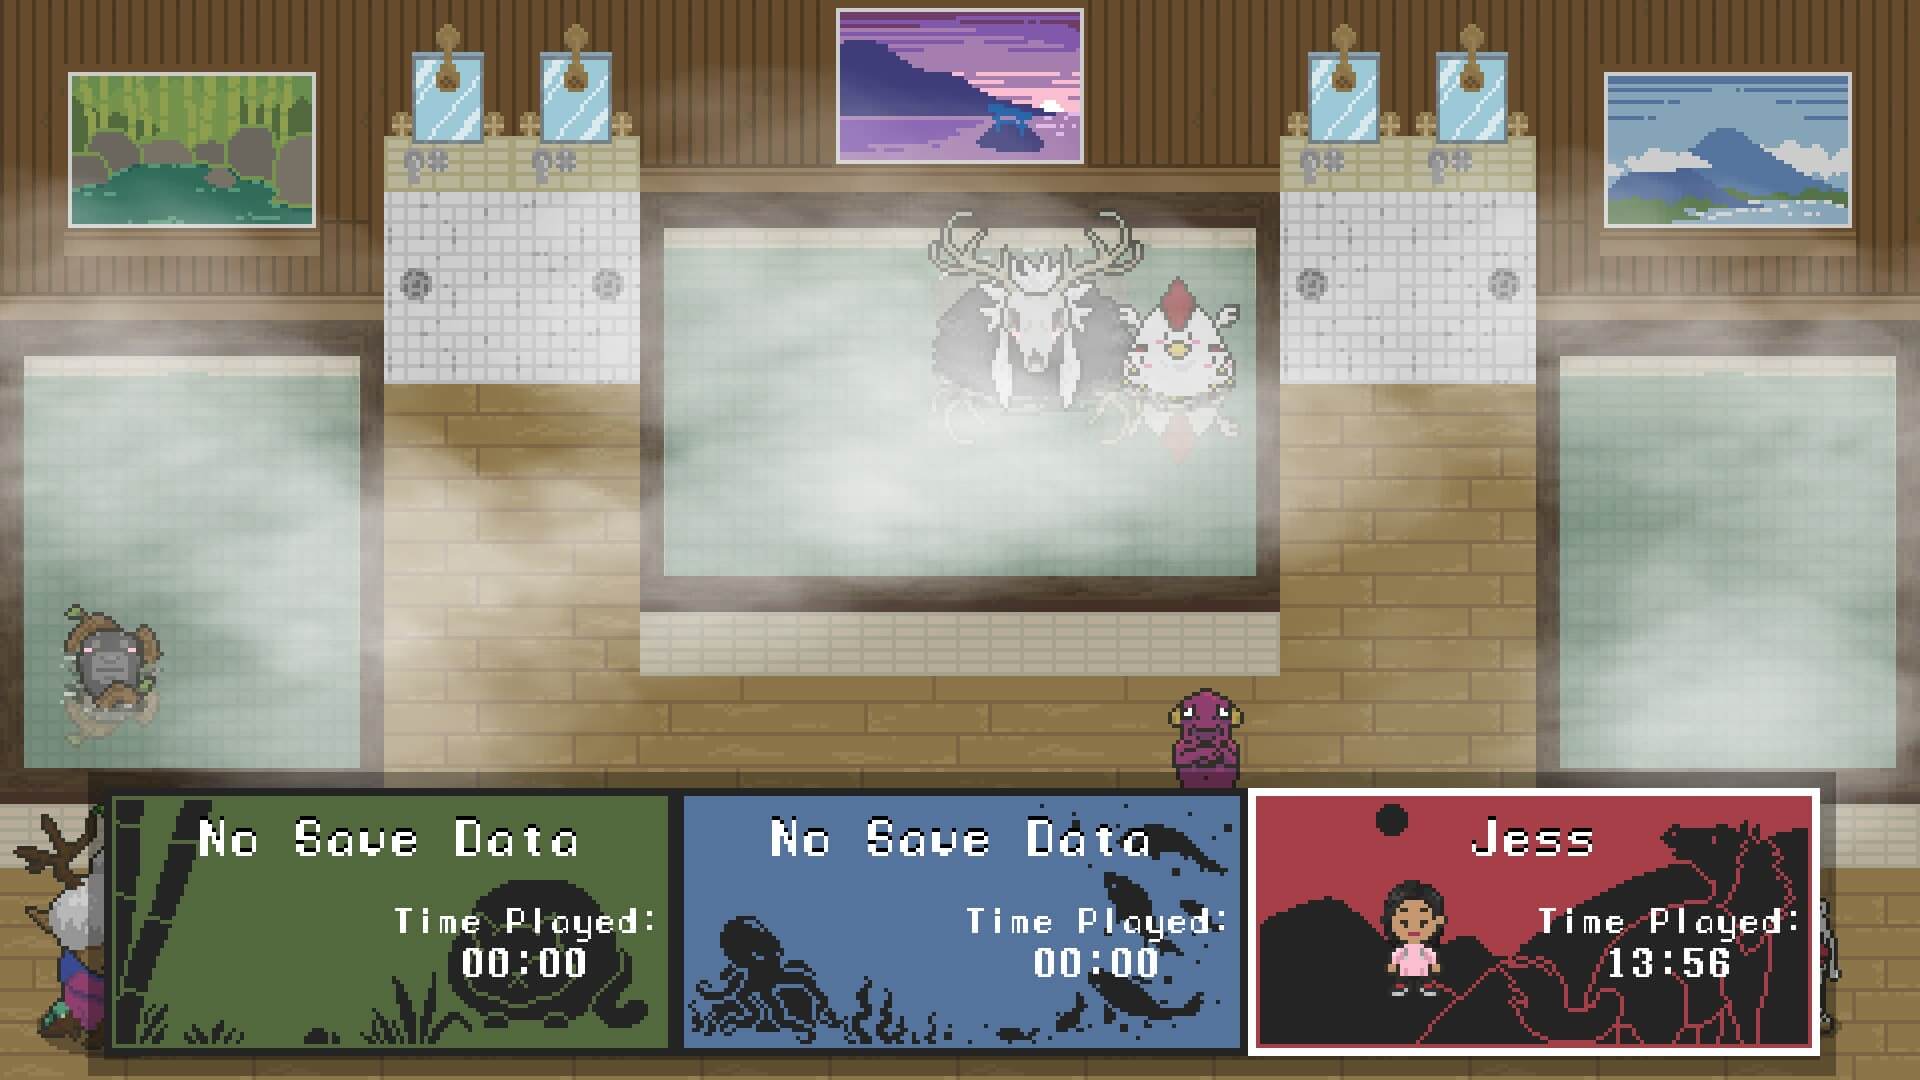 Screen capture of Spirittea's loading screen. Three hot tubs are displayed, the left and centre ones are occupied by various spirits. The third profile is selected, with the name Jess and time played 13:56.